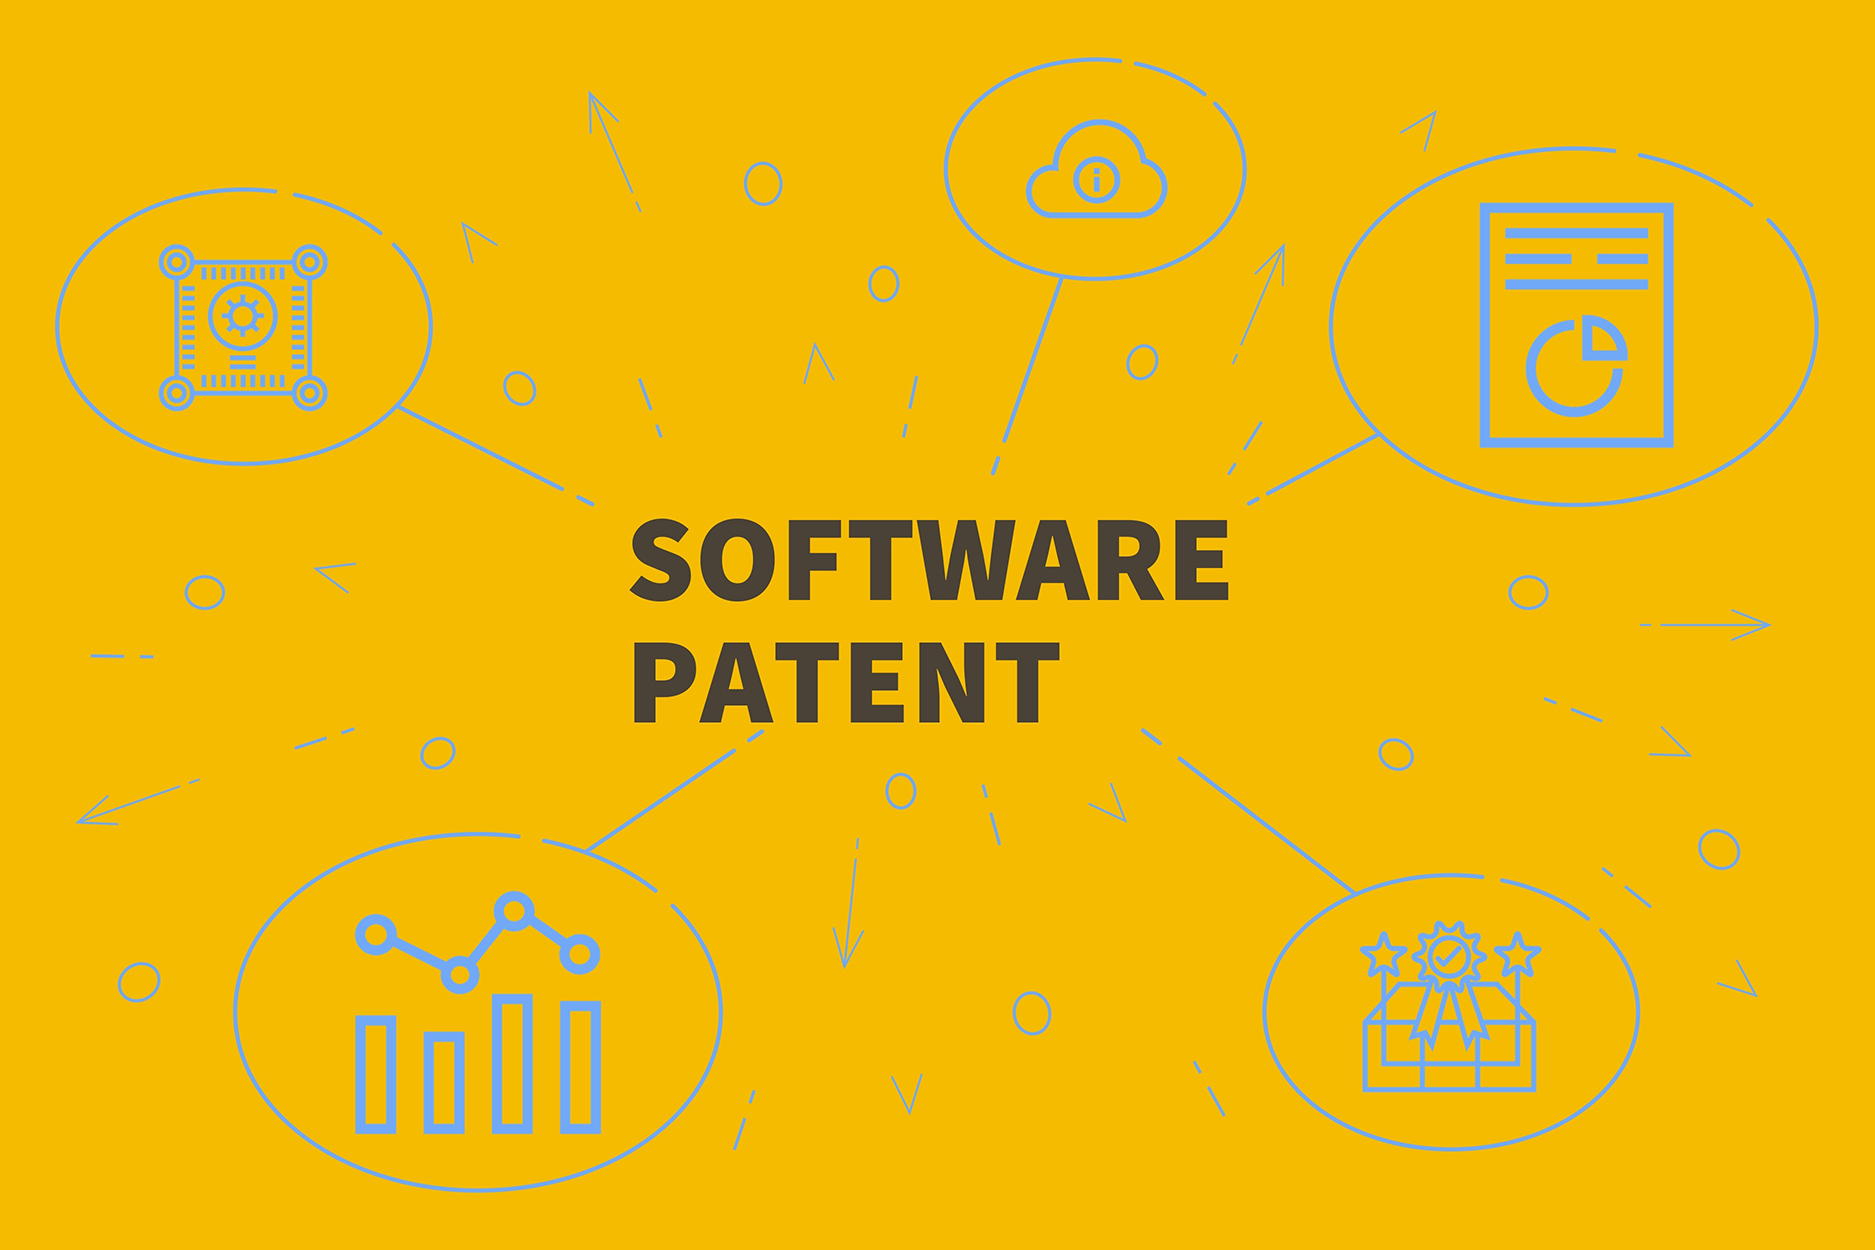 The words software patent on a yellow background with light blue icons around it